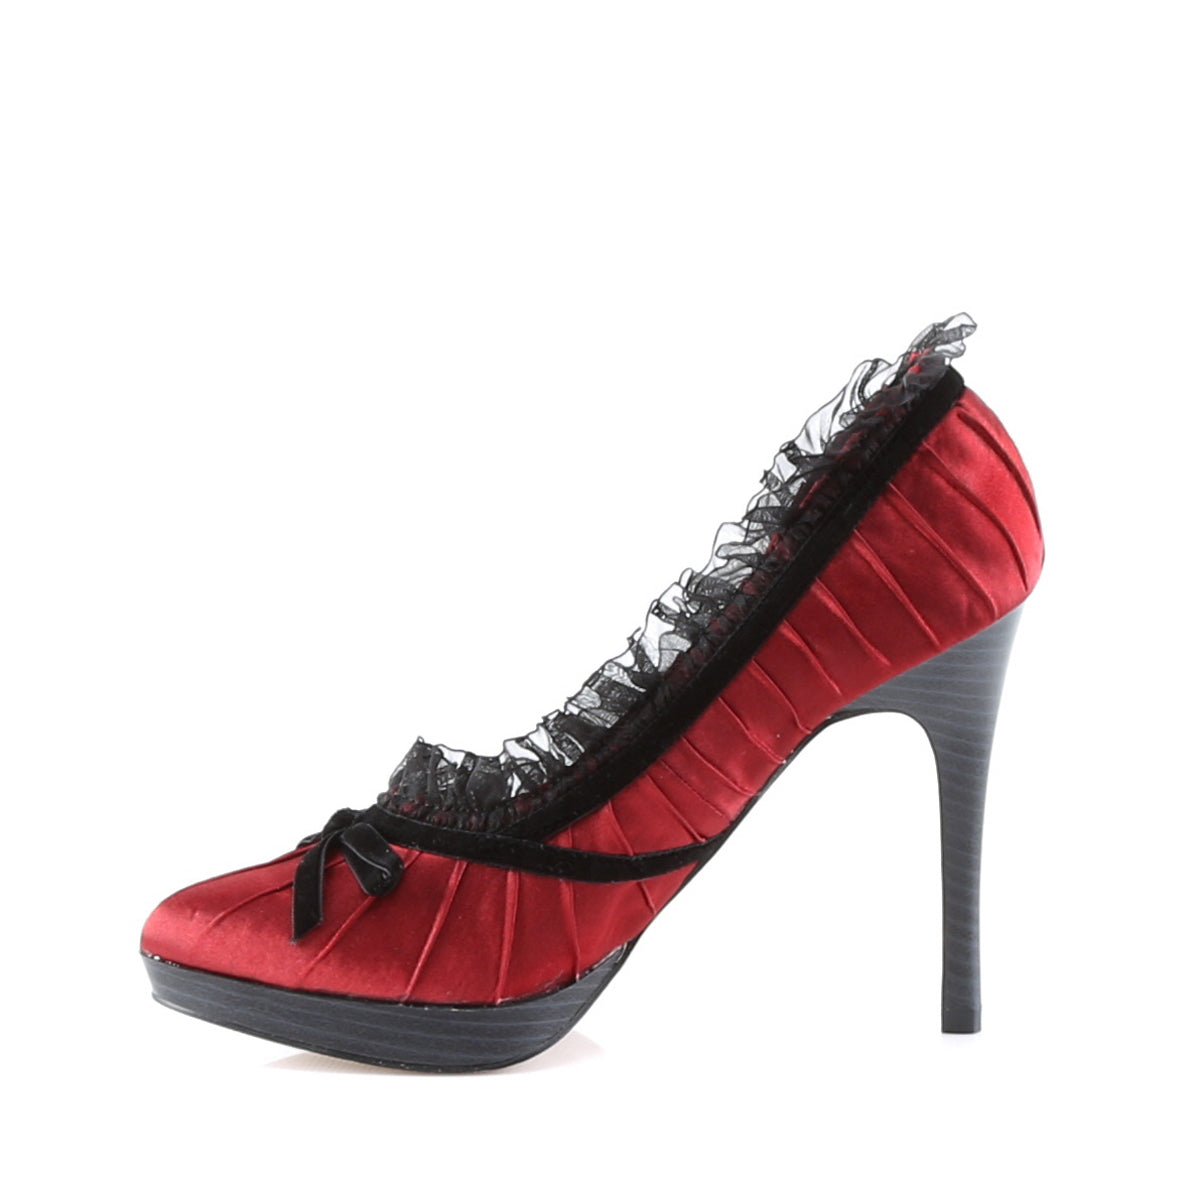 BLISS-38 Retro Glamour Pin Up Couture Platforms Red-Blk Satin